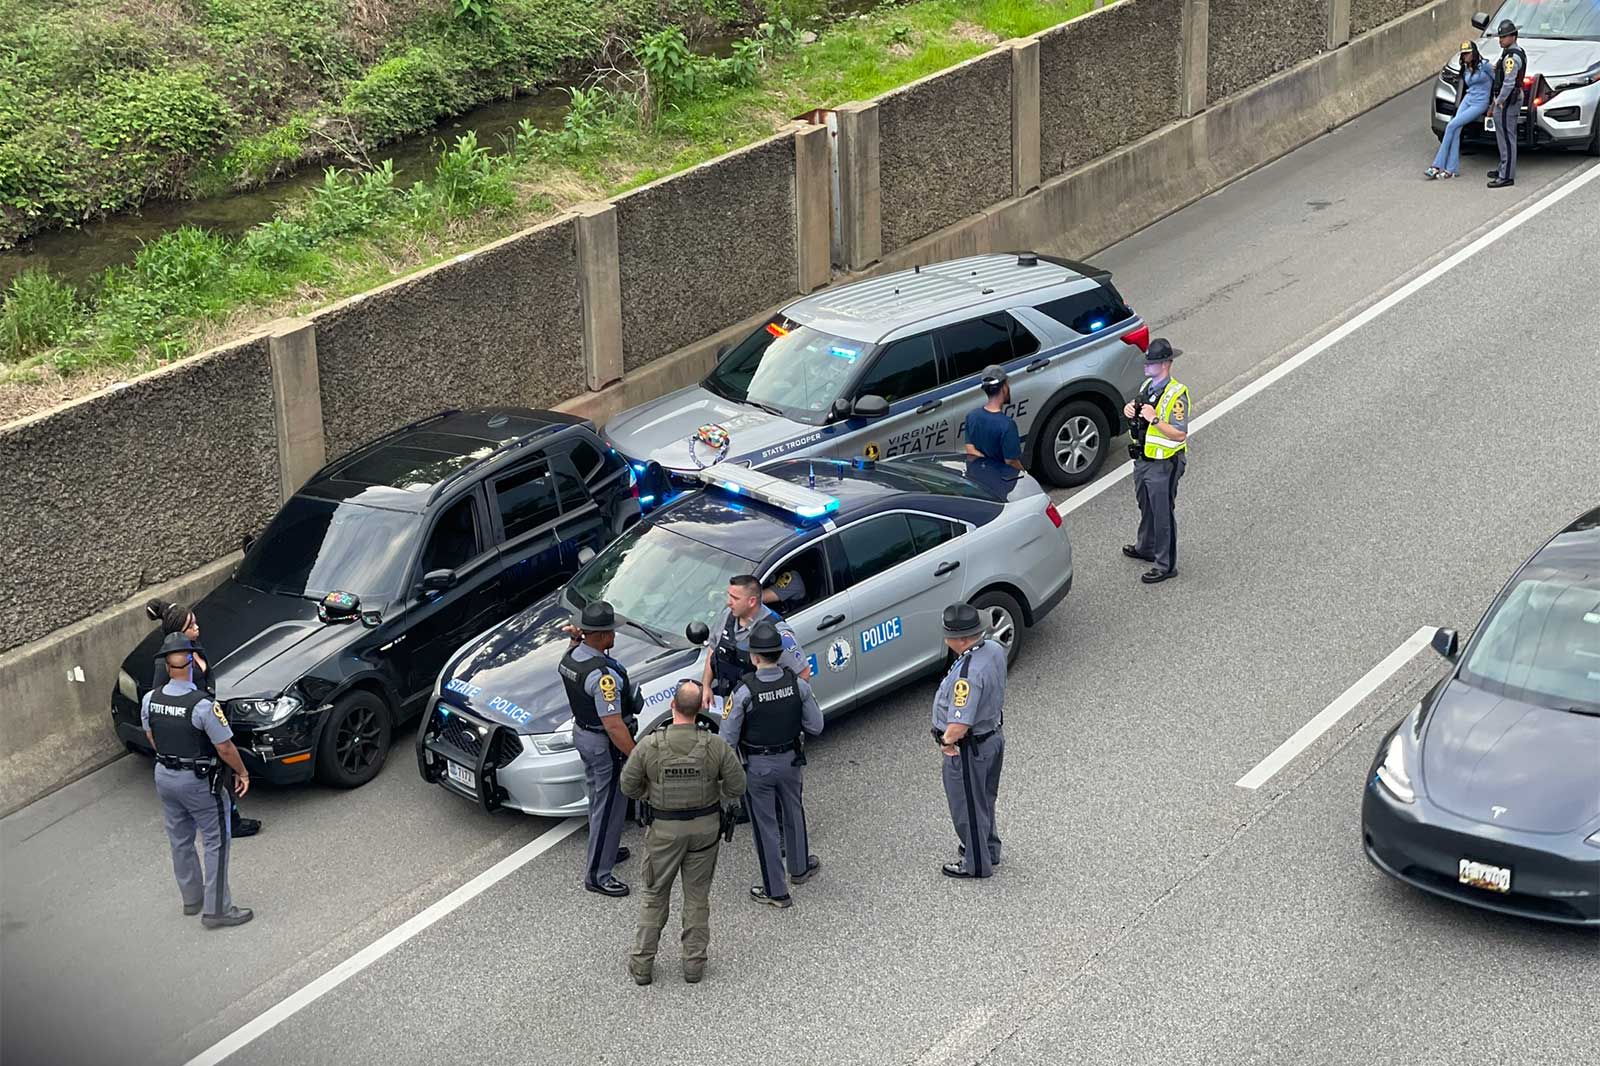 Police chase ends on I-66 in Arlington after Fairfax store theft | ARLnow.com